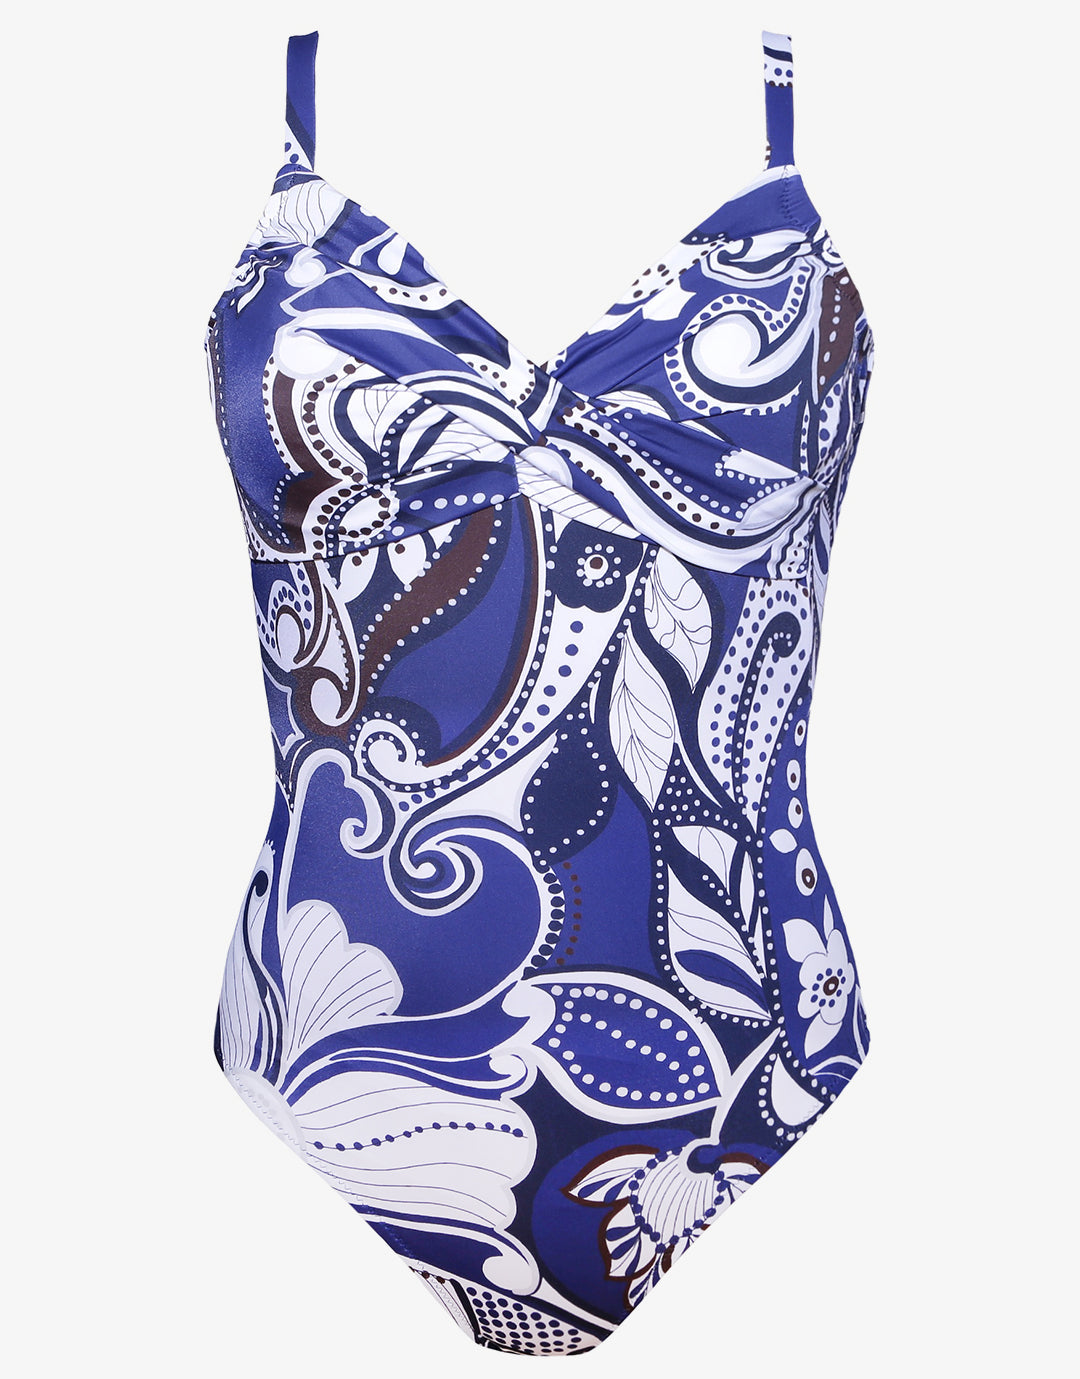 Cachemire Underwire Crossover Swimsuit - Blue and White - Simply Beach UK